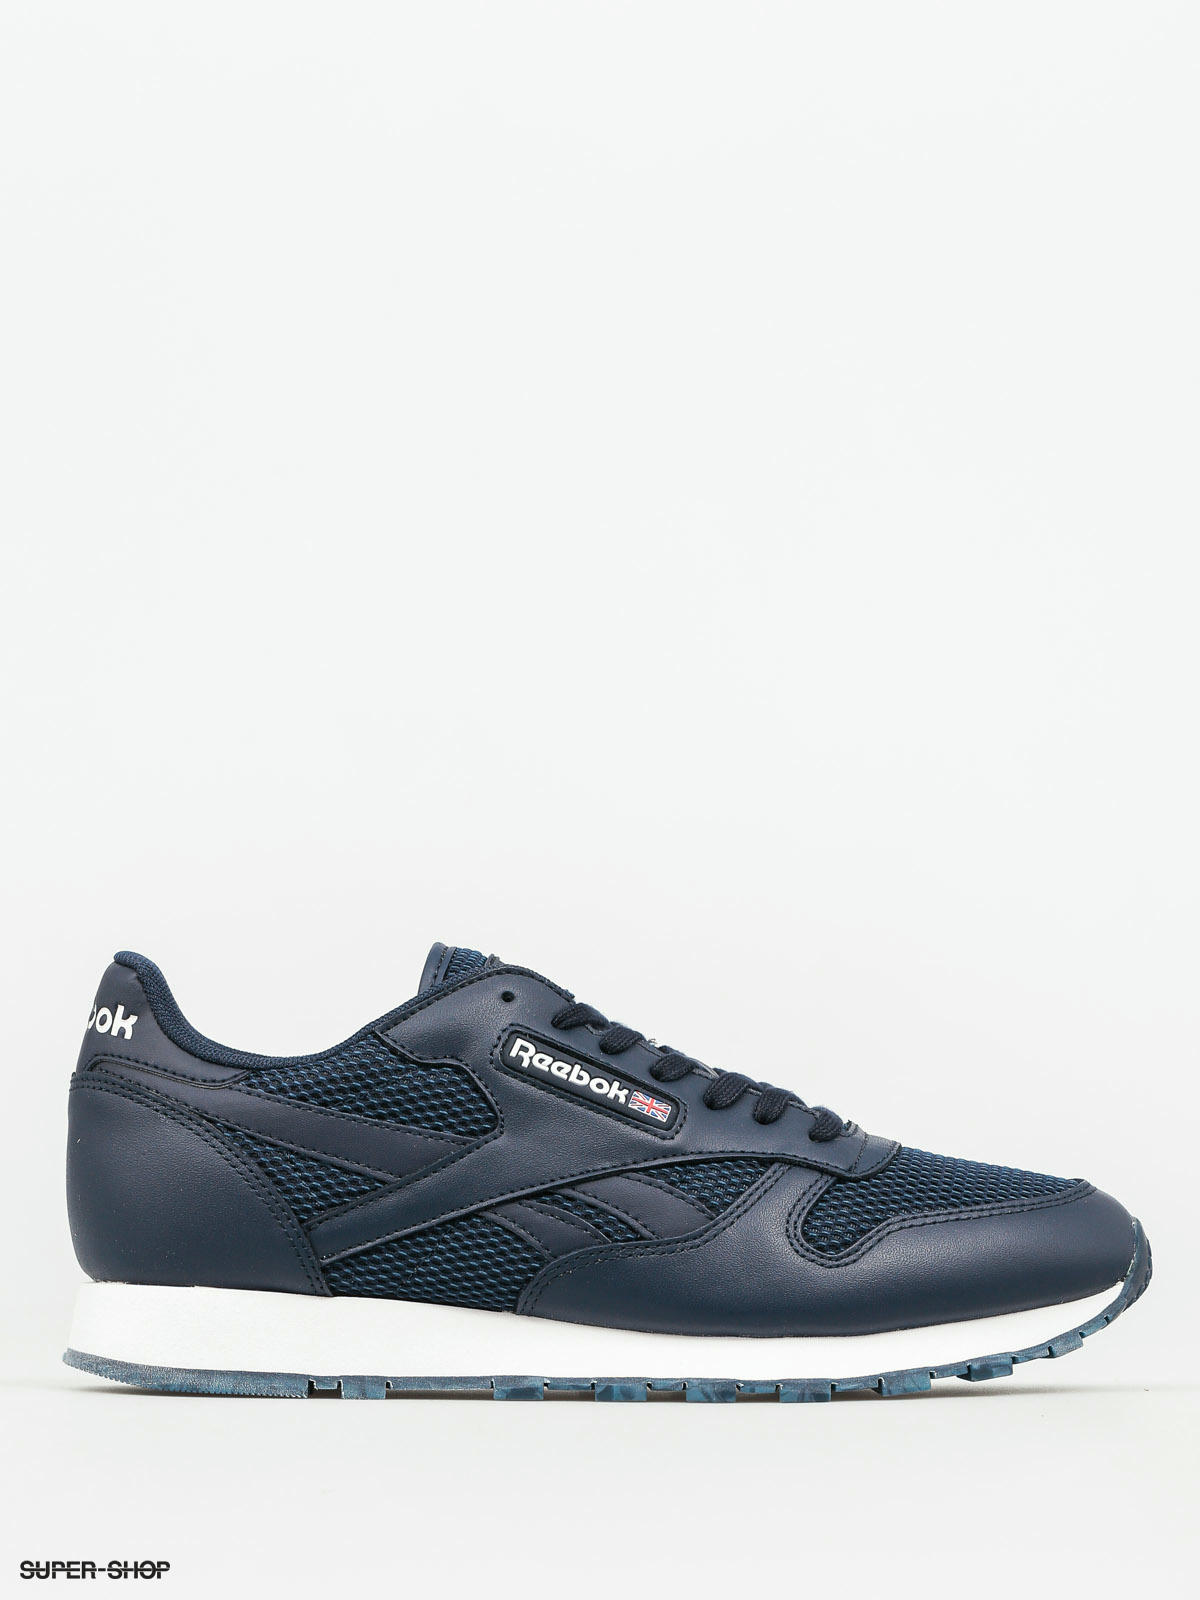 Reebok Shoes Leather (collegiate navy/white)